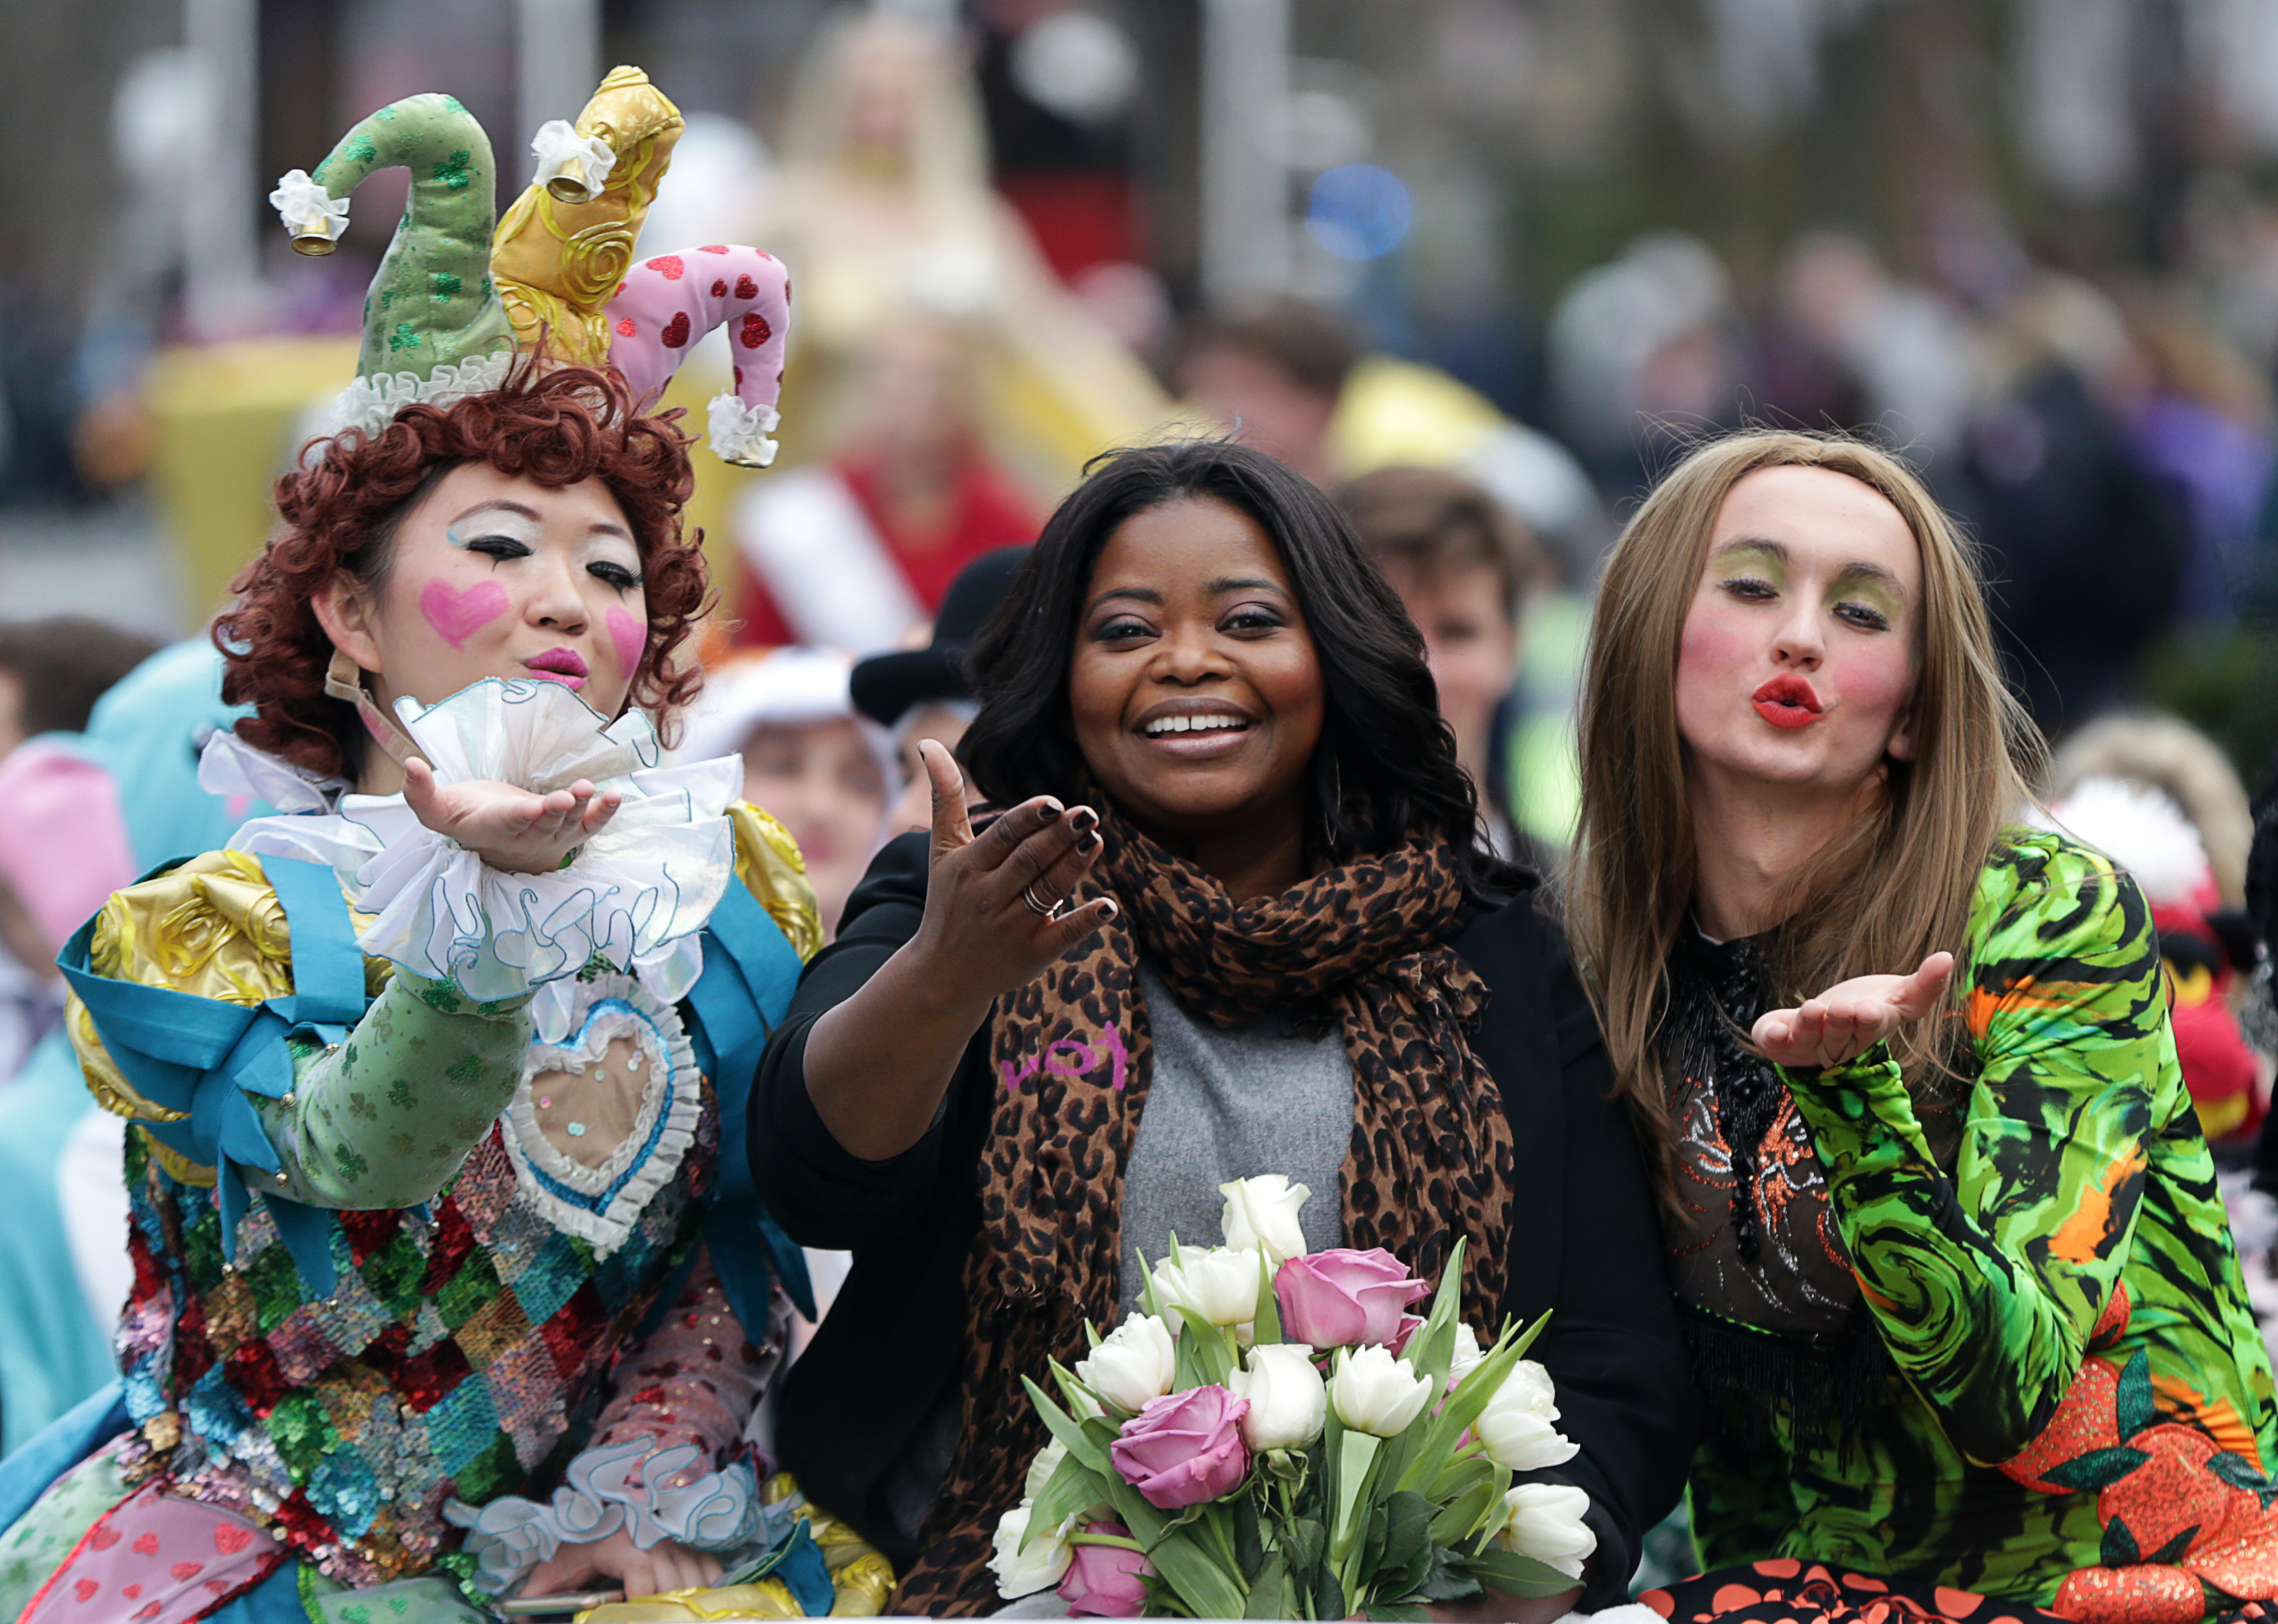 CAMBRIDGE, MA - JANUARY 26: Octavia Spencer, center, 2017 Hasty Pudding Woman of the Year, rides in a car with Guan-Yue Chen, left, and Dan Milashewski, right, during the annual parade down Massachusetts Avenue in Cambridge, Mass., on Jan. 26, 2017. (Photo by Jonathan Wiggs/The Boston Globe via Getty Images) (Boston Globe—Boston Globe via Getty Images)